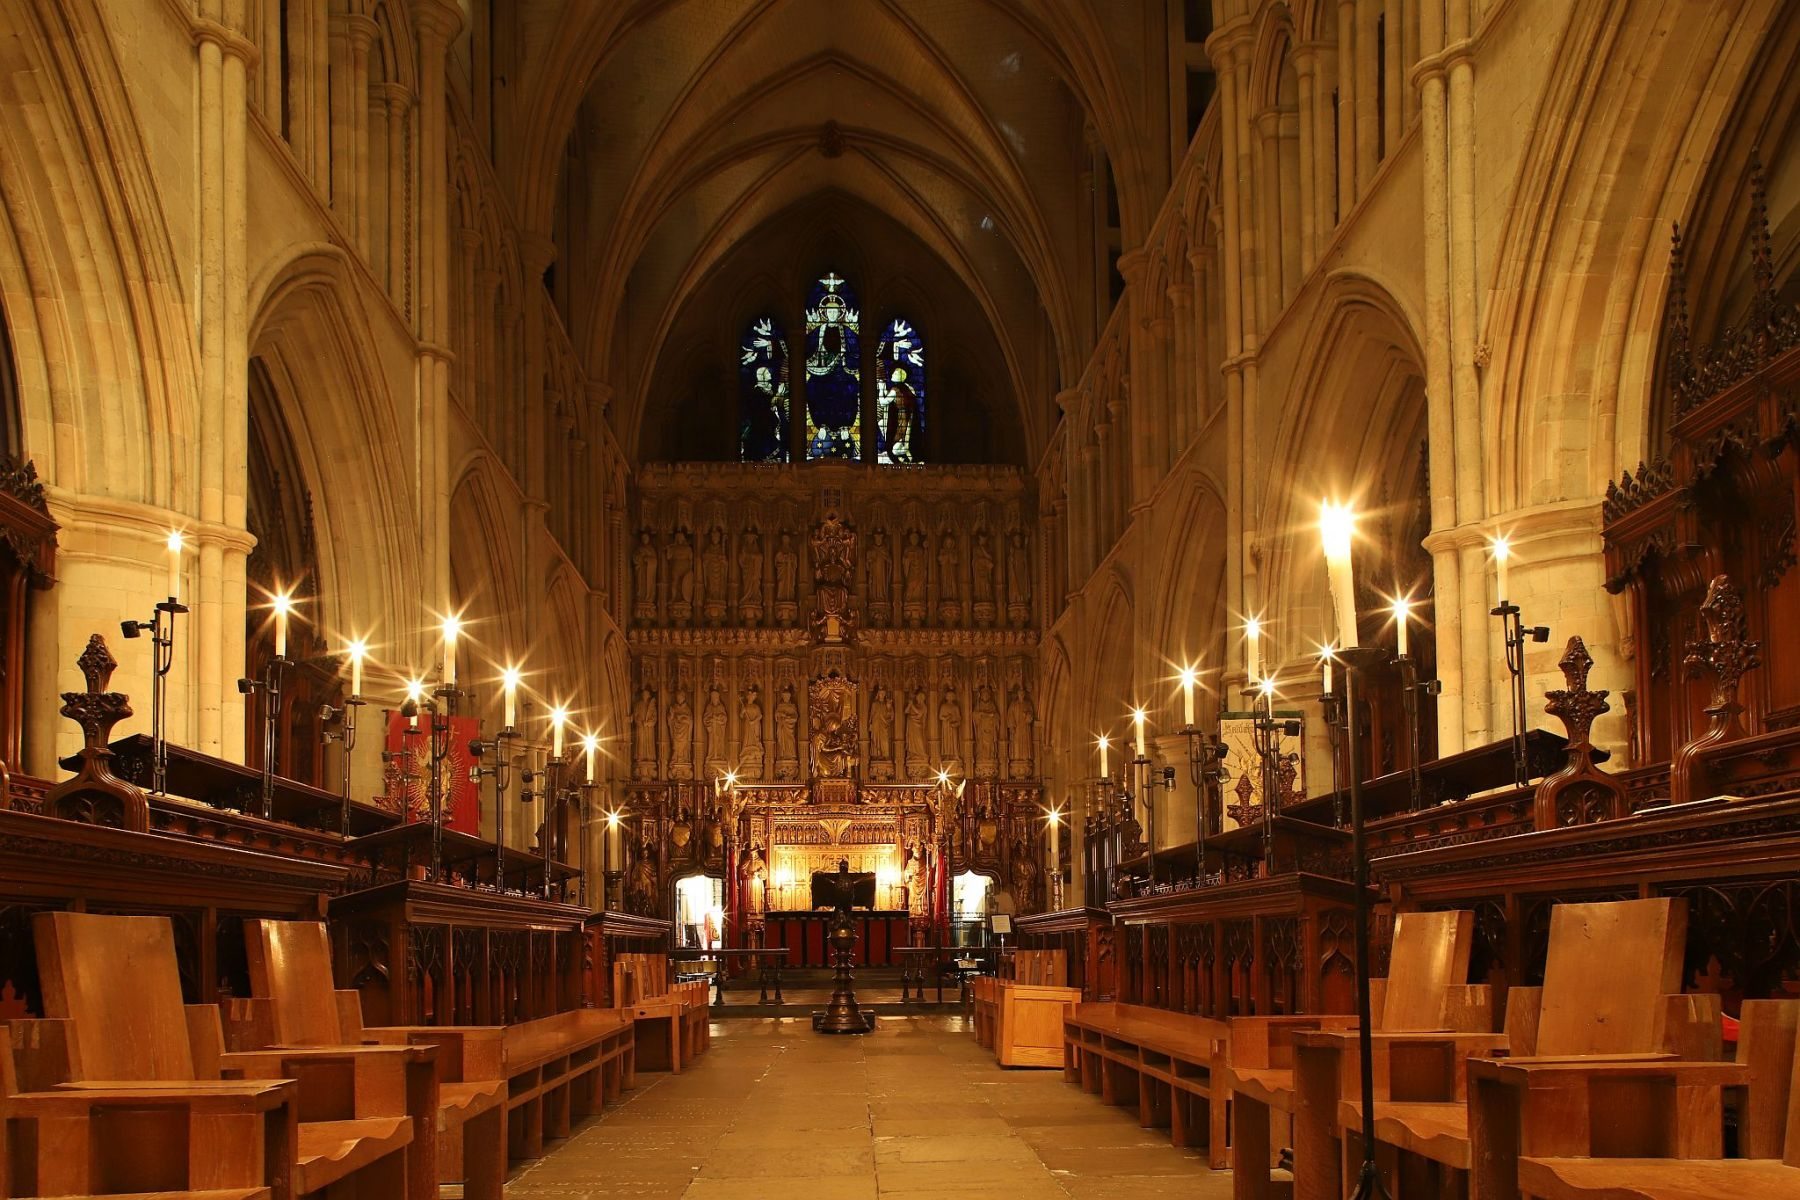 Southwark Cathedral lit by candlelight for a photography evening